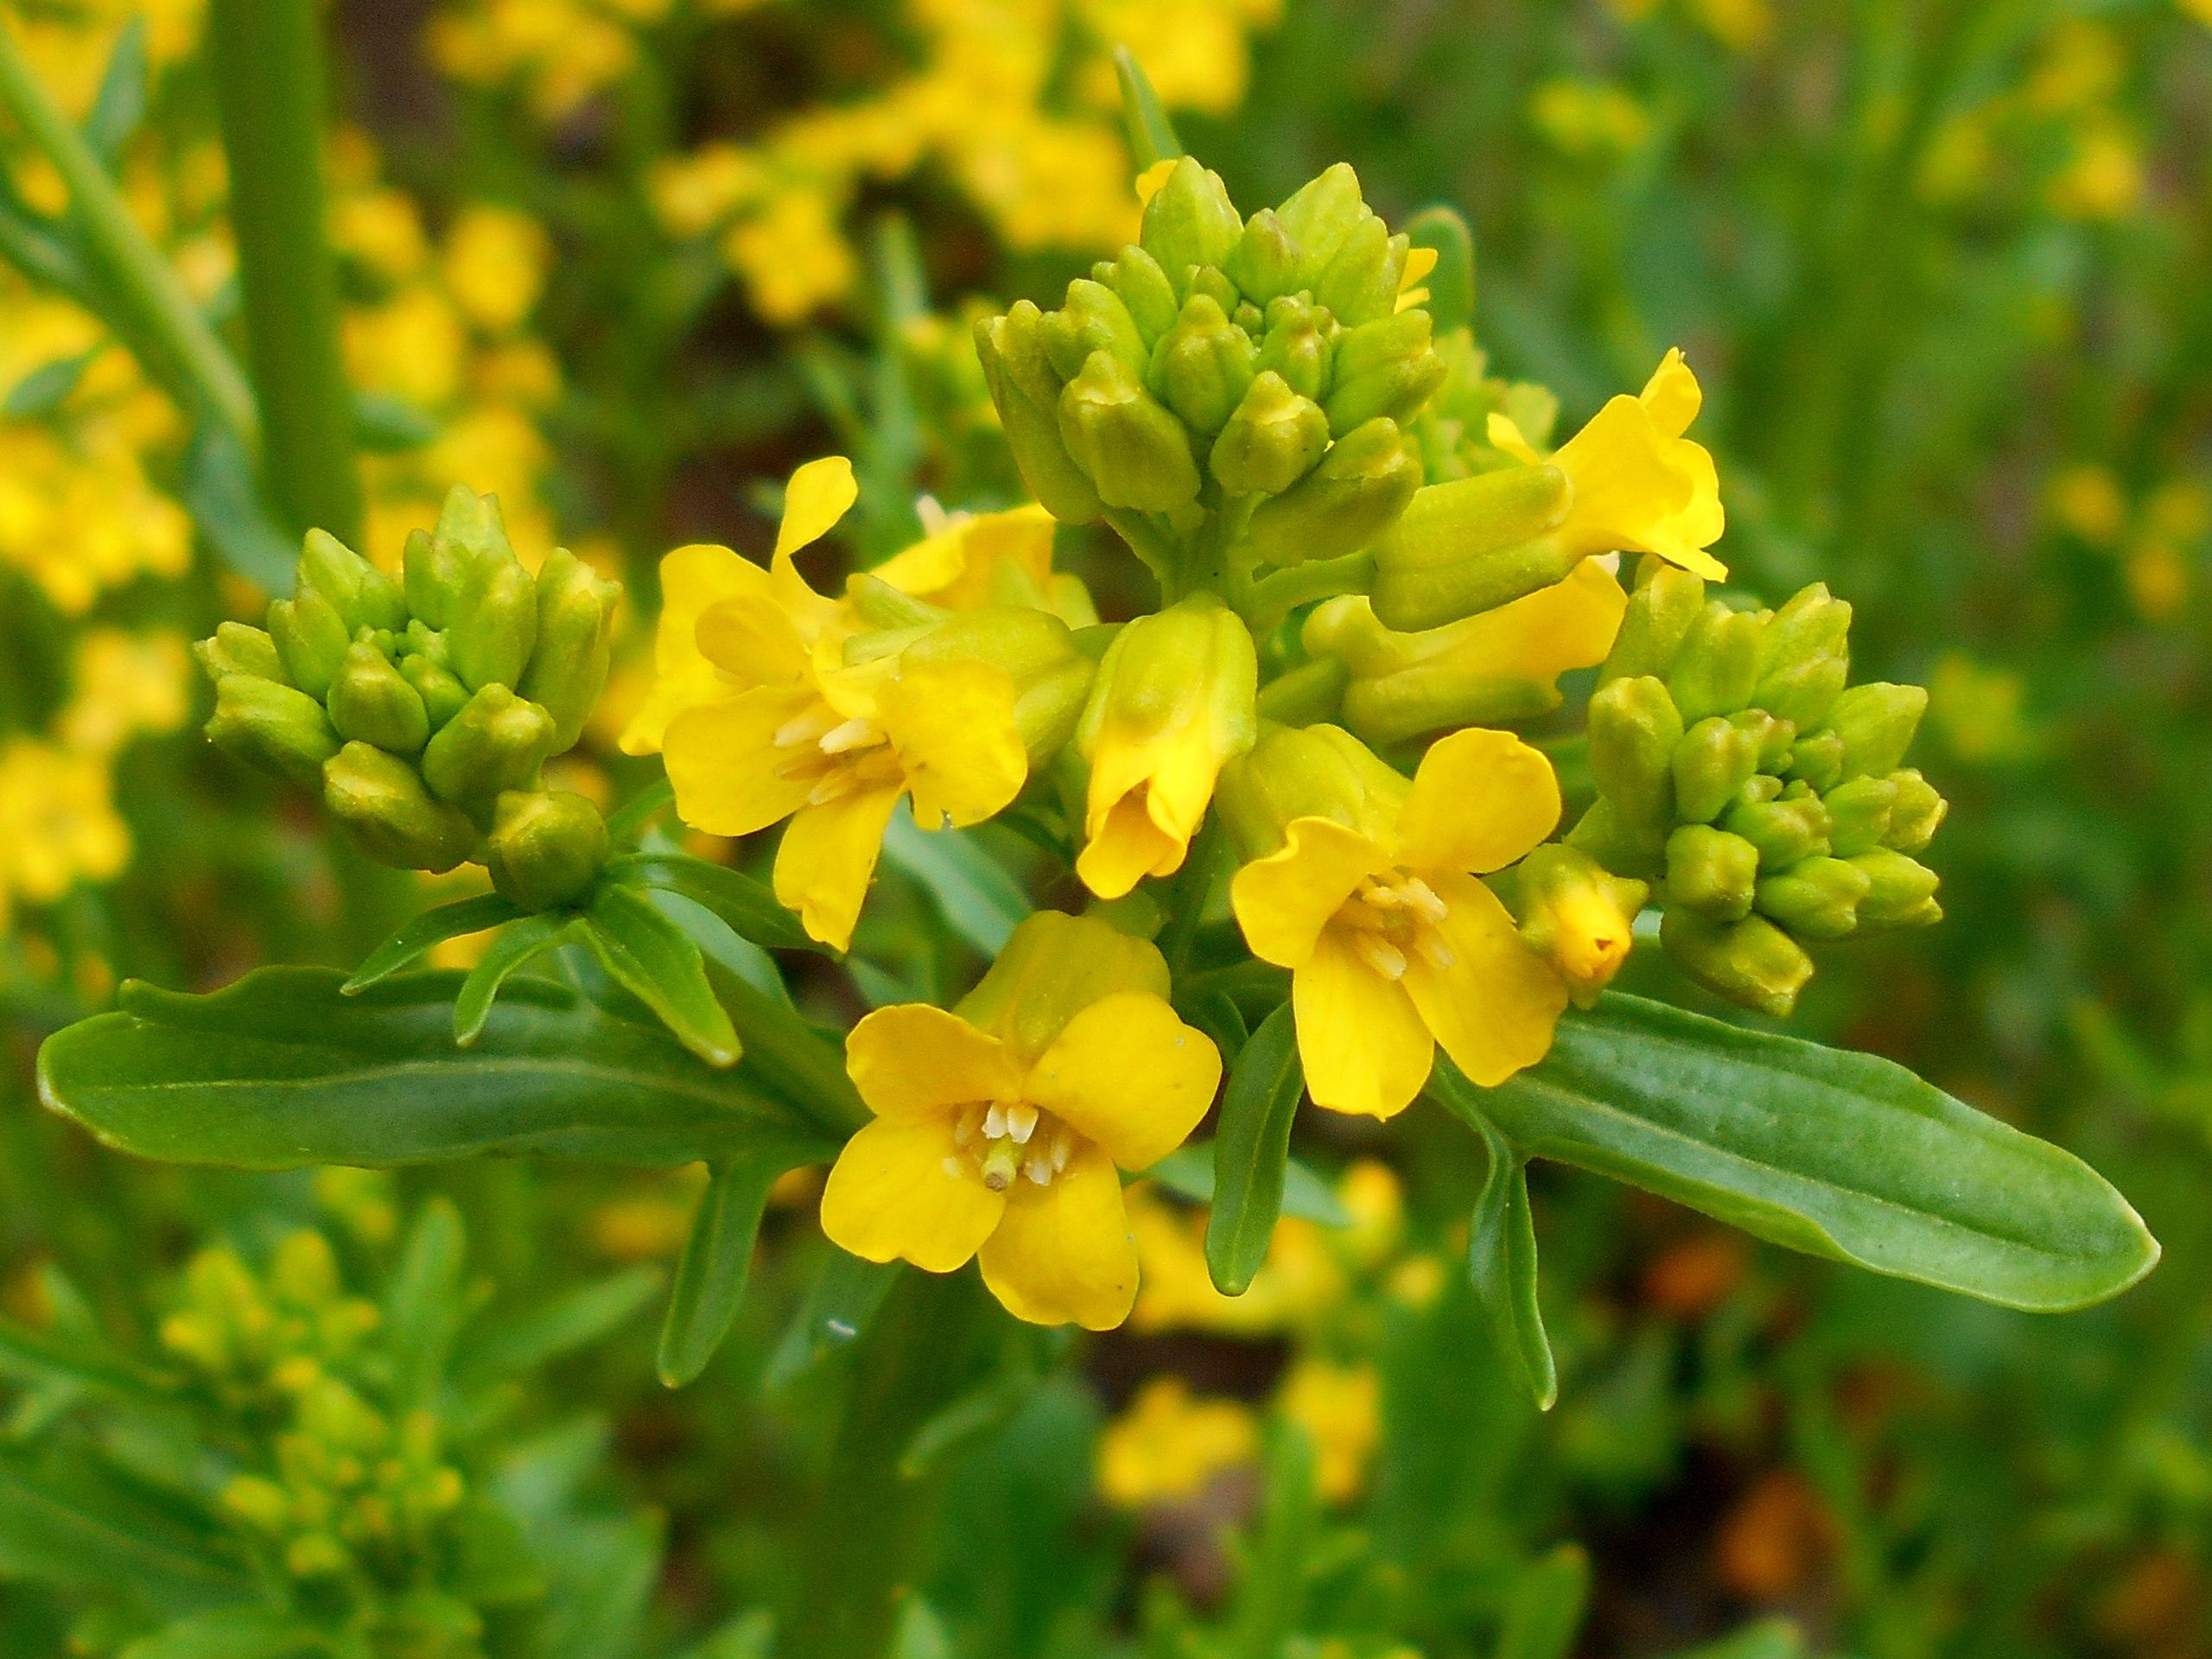 yellow flowers with yellow filaments, yellow-lime buds, green leaves and stems